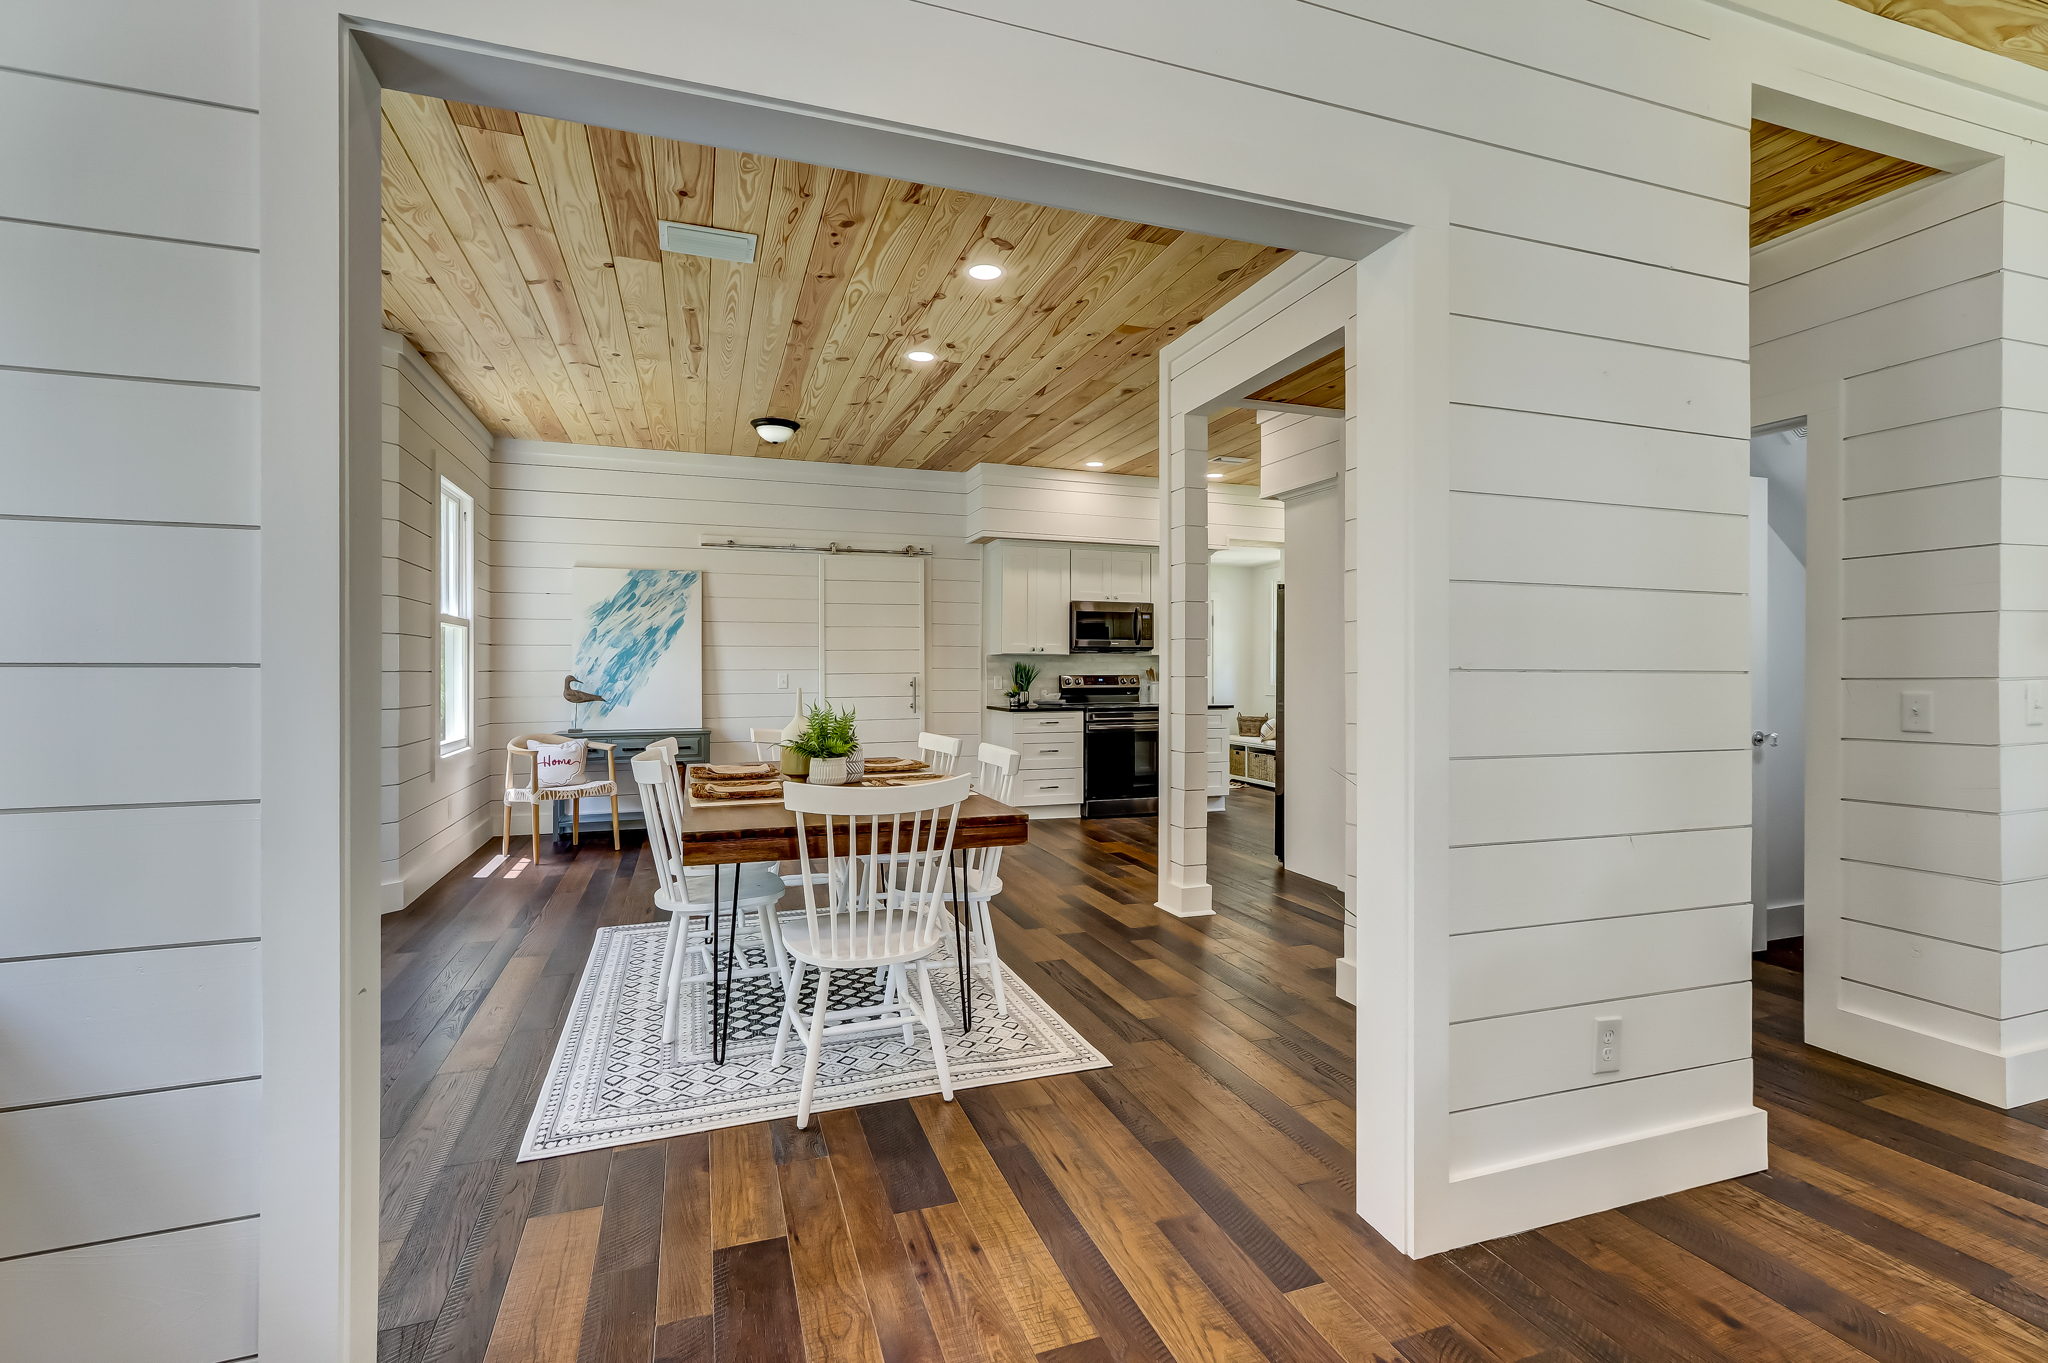 Great architectural features separate each room while maintaining an open floorplan